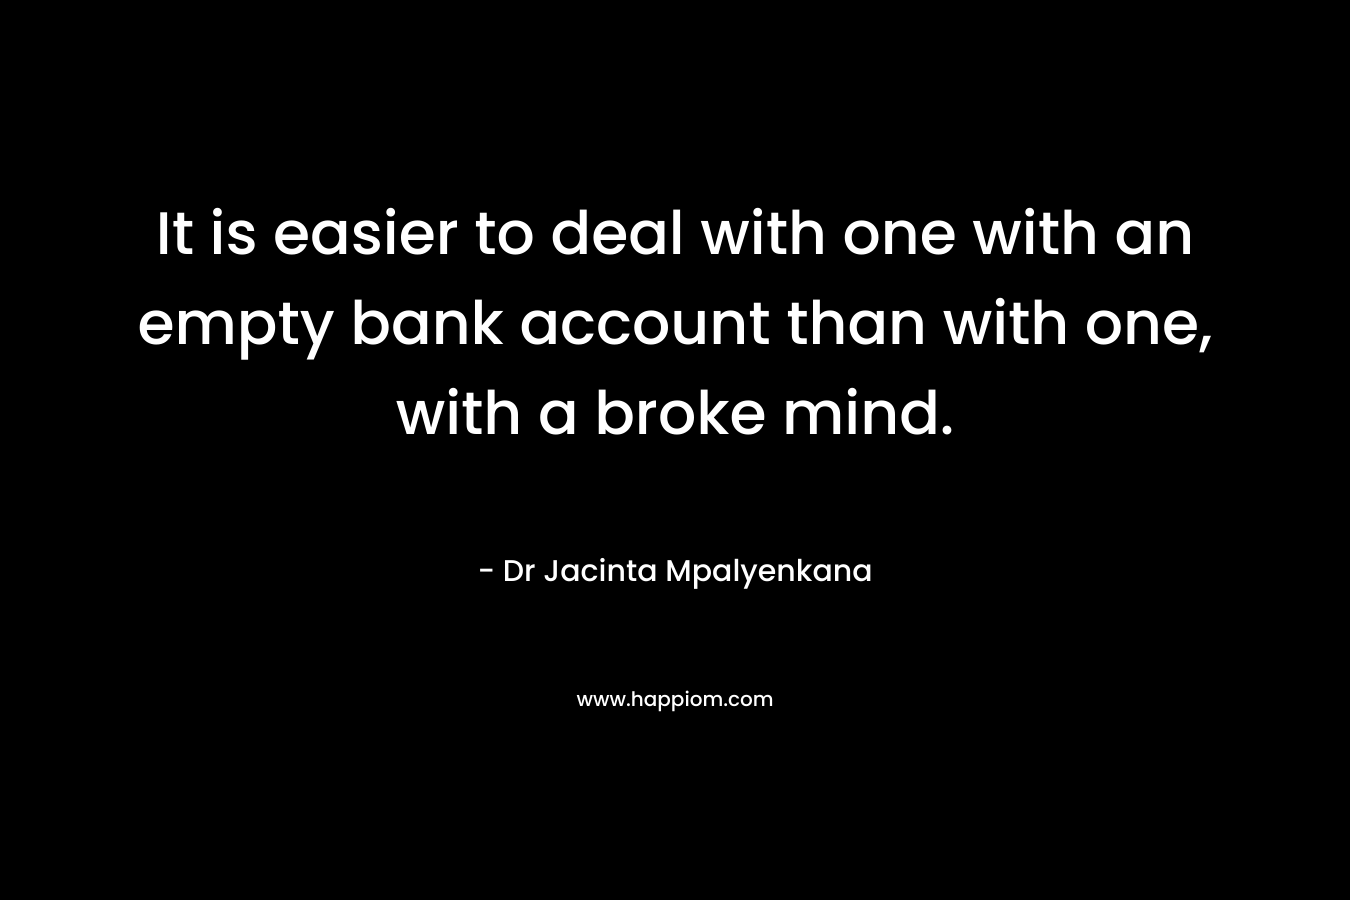 It is easier to deal with one with an empty bank account than with one, with a broke mind.